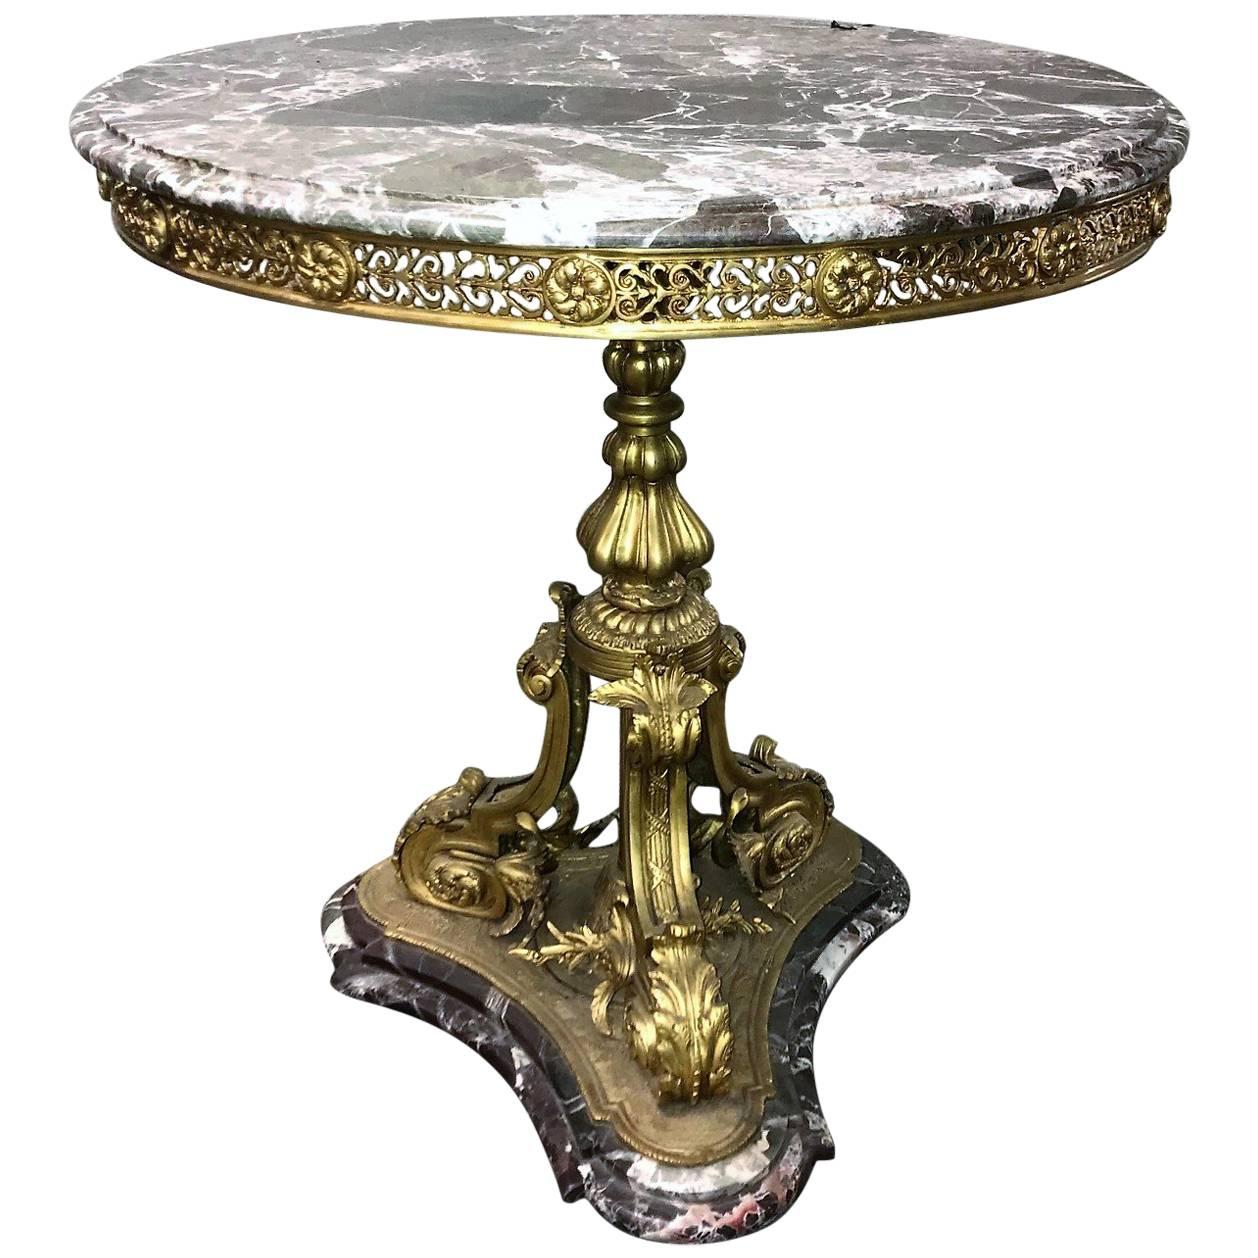 Antique French Rococo style bronze and marble table, circa 1900